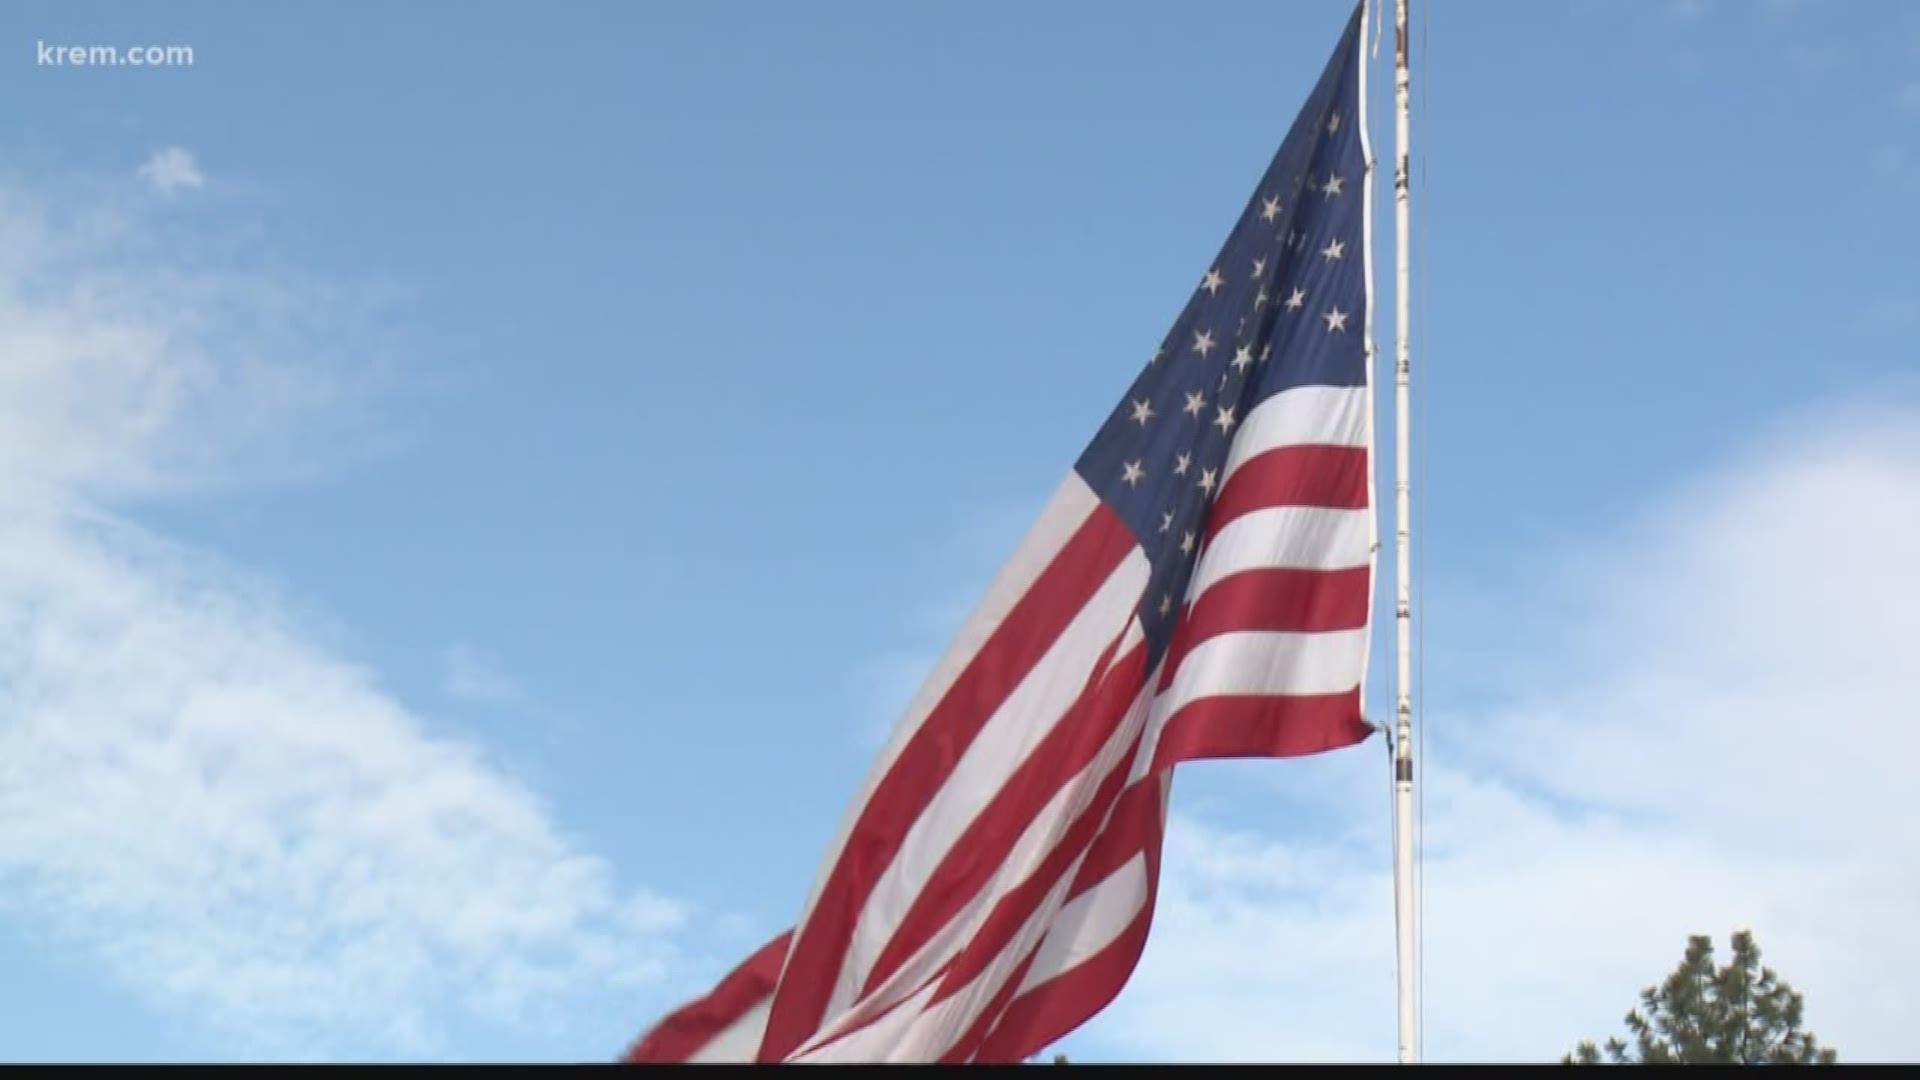 The Post Falls City Council passed an amendment to the city's code on Tuesday allowing larger flags after some push-back from a local business.